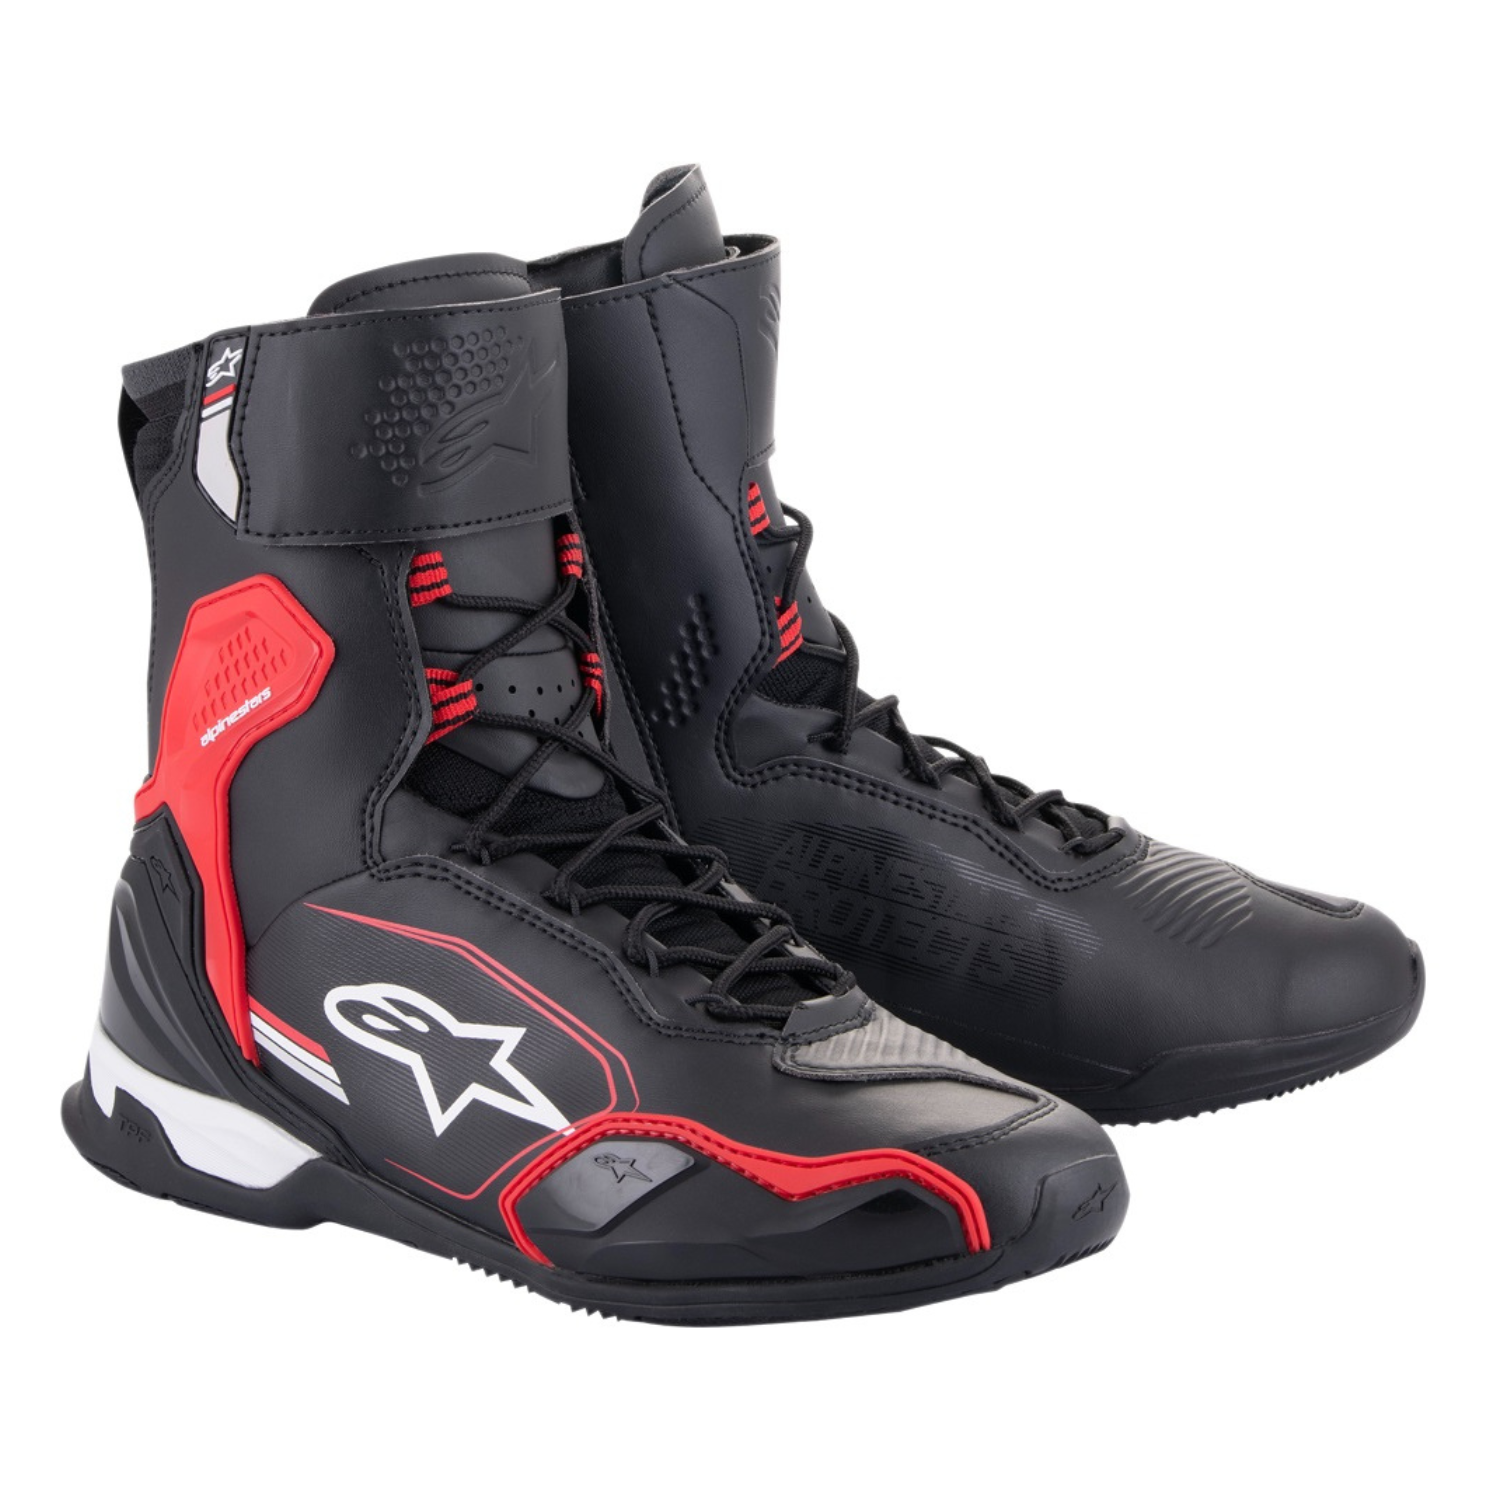 Image of Alpinestars Superfaster Shoes Black Bright Red White Taille US 13